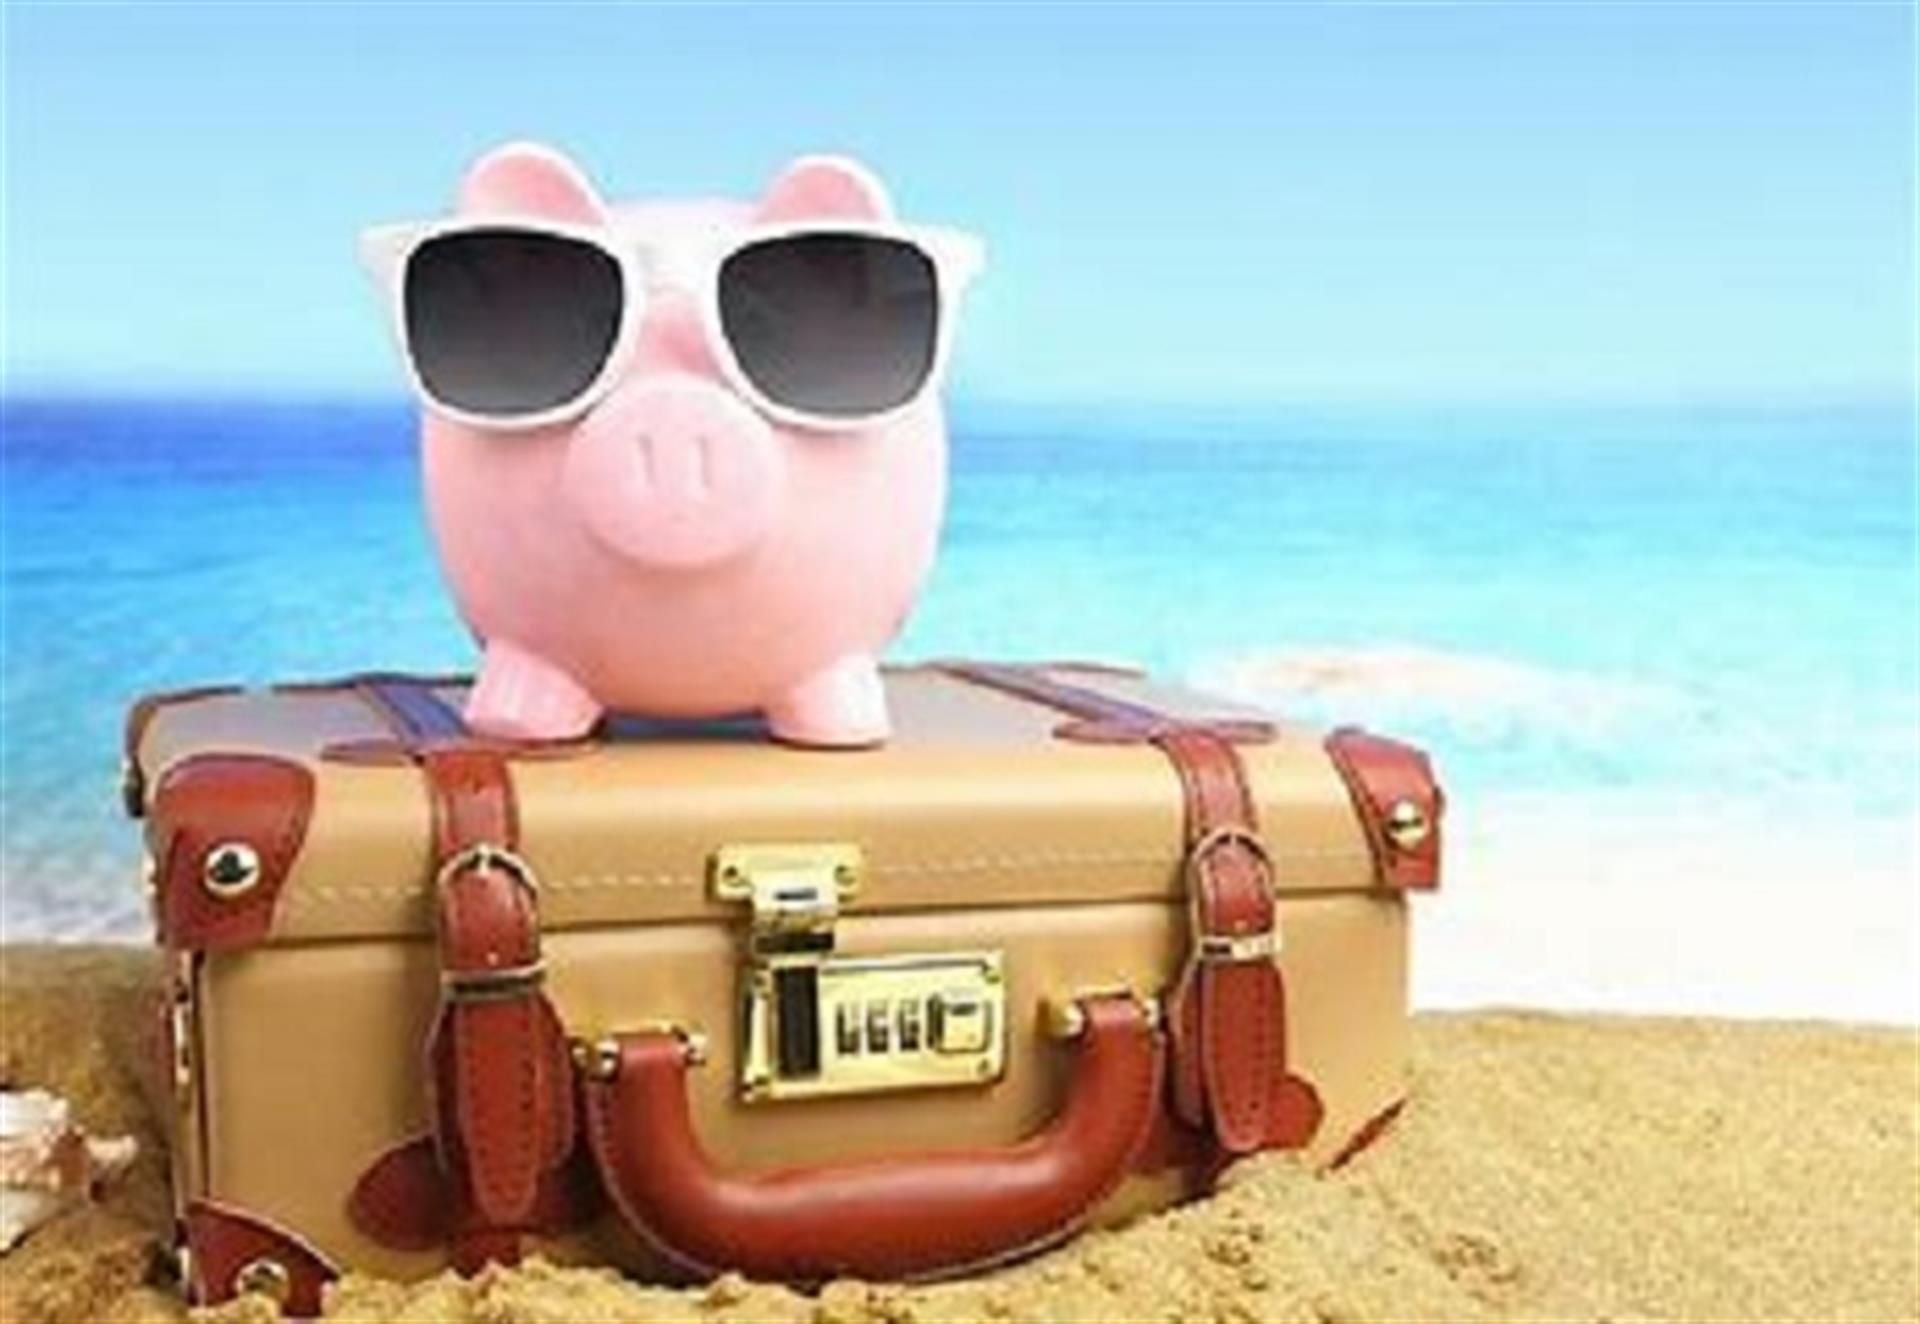 Vacation on a budget